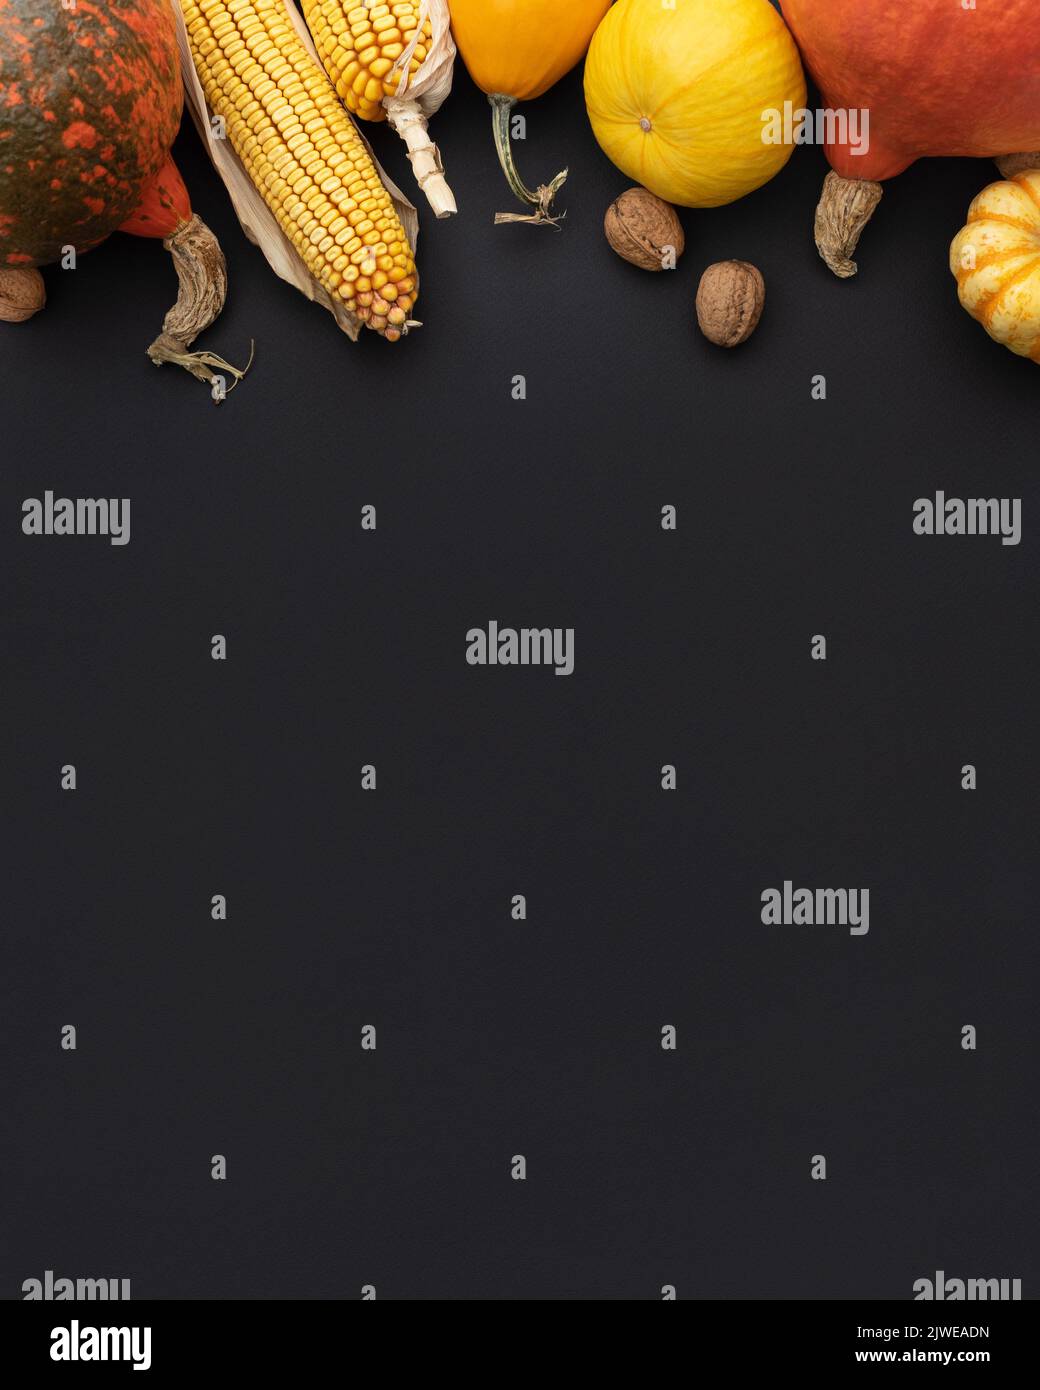 Harvest of winter squash and decorative pumpkins on black background with border Stock Photo